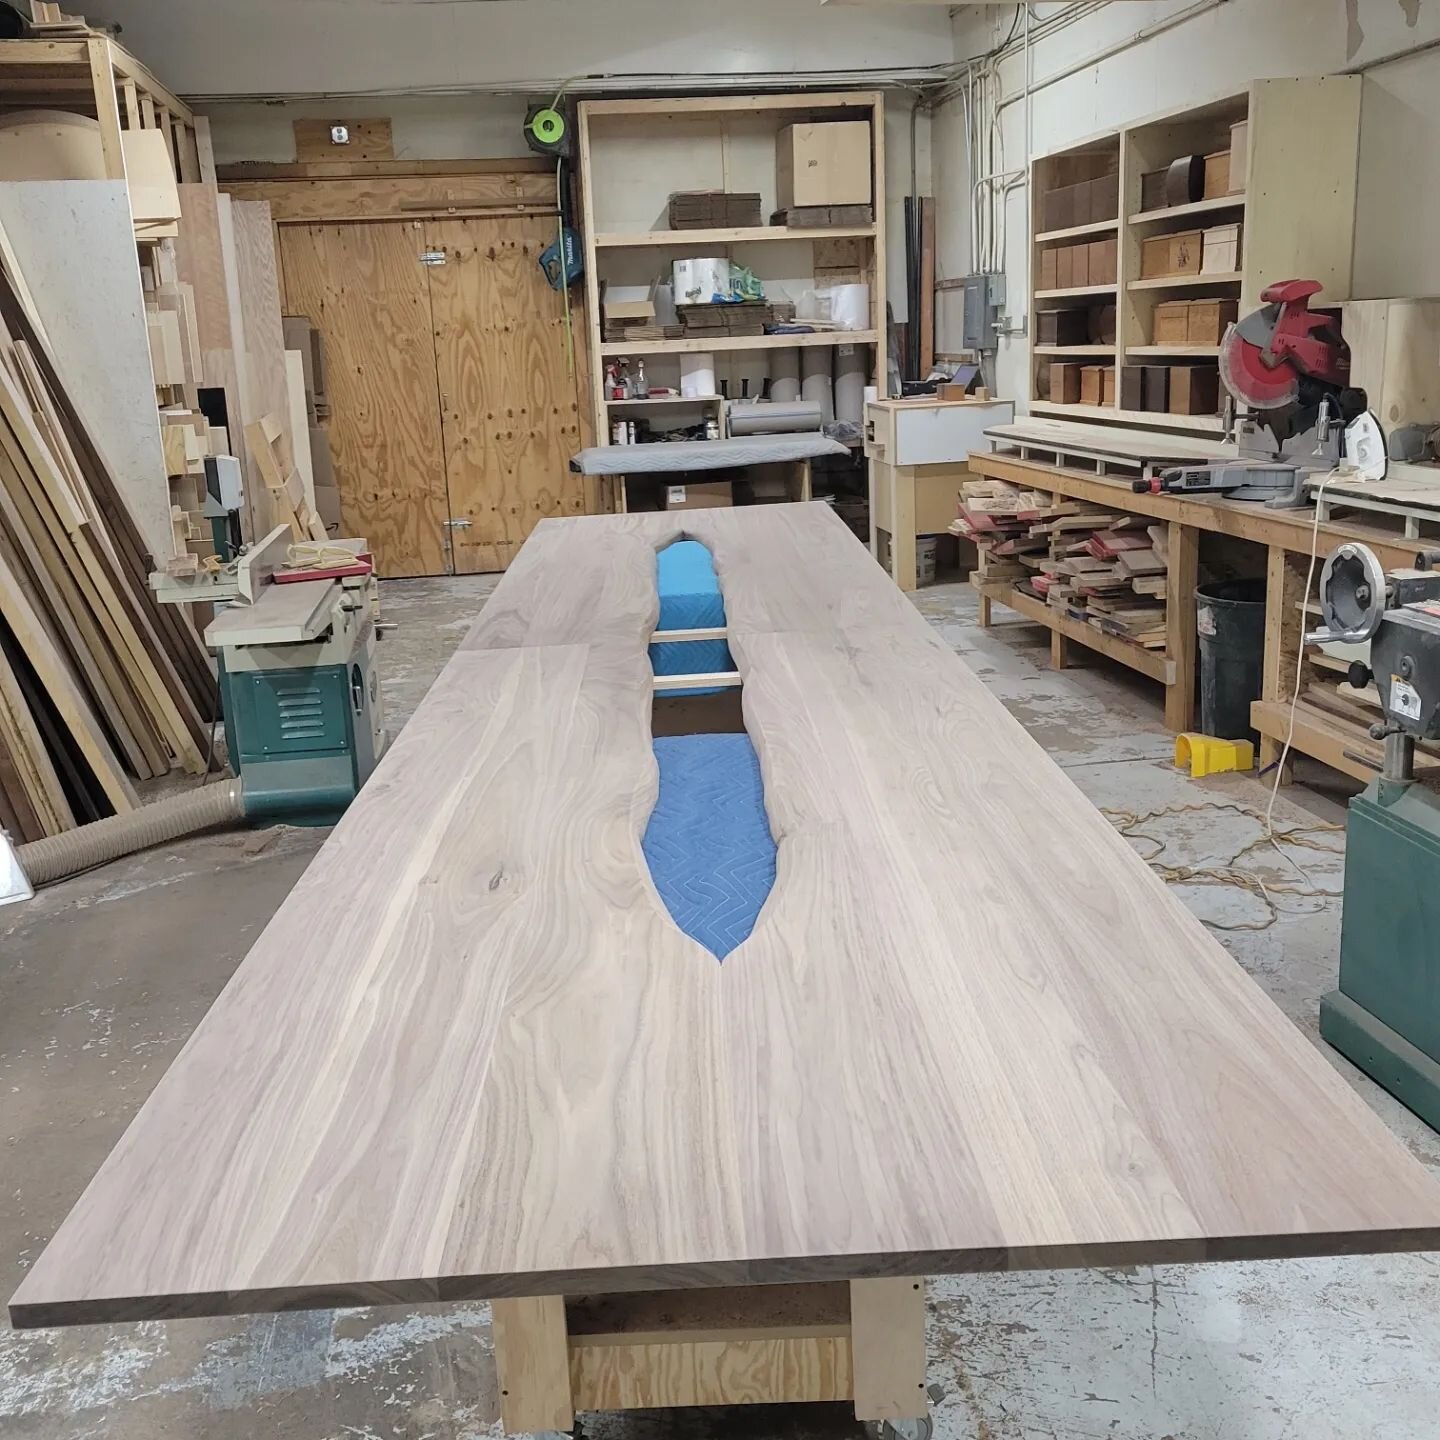 18ft walnut conference table ready for finish.

#woodfurniture #handcrafted #conferencetable #madeinmilwaukee